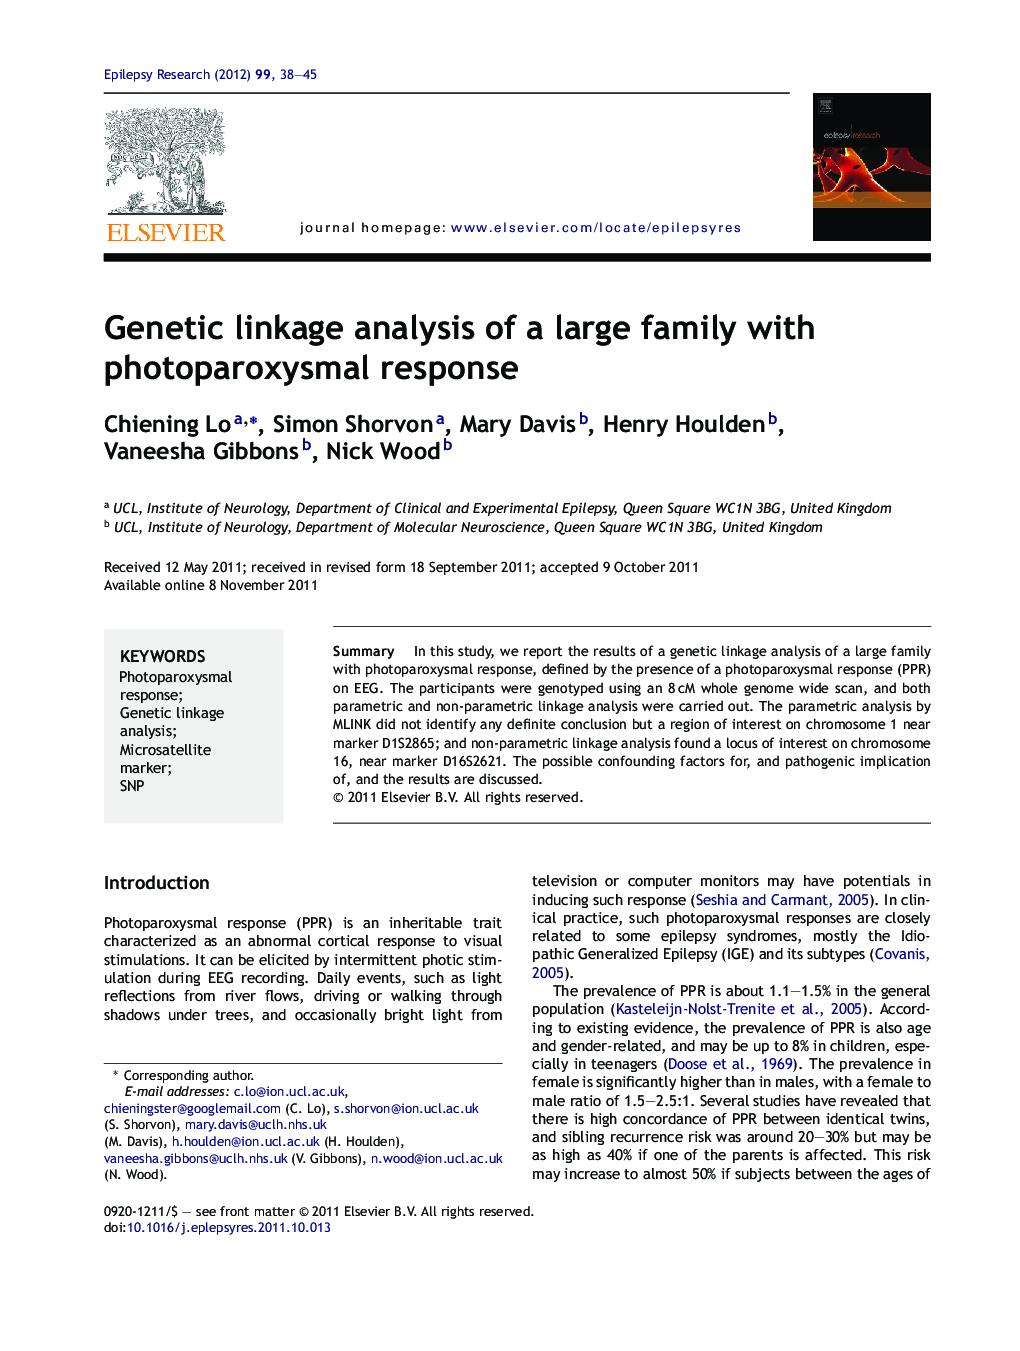 Genetic linkage analysis of a large family with photoparoxysmal response